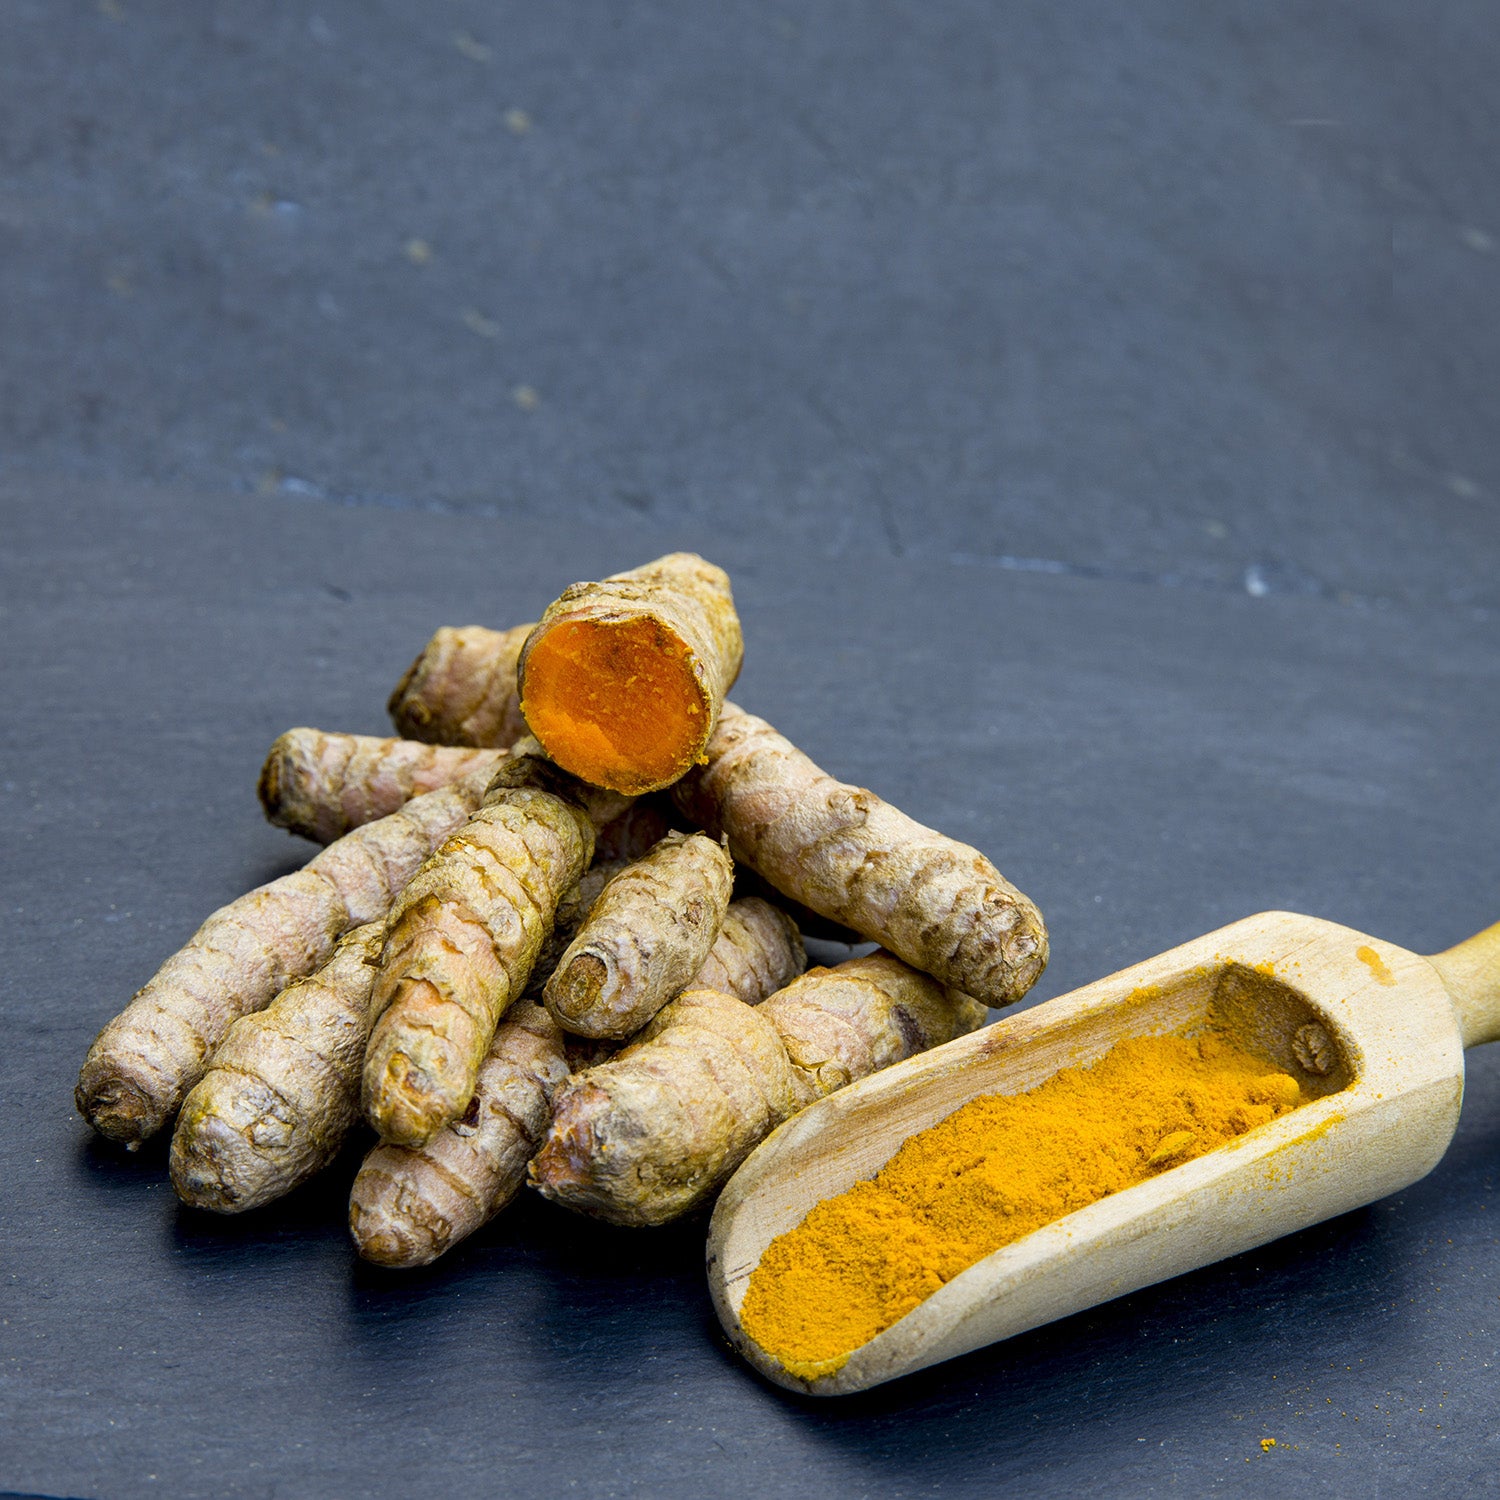 Turmeric and its Benefits